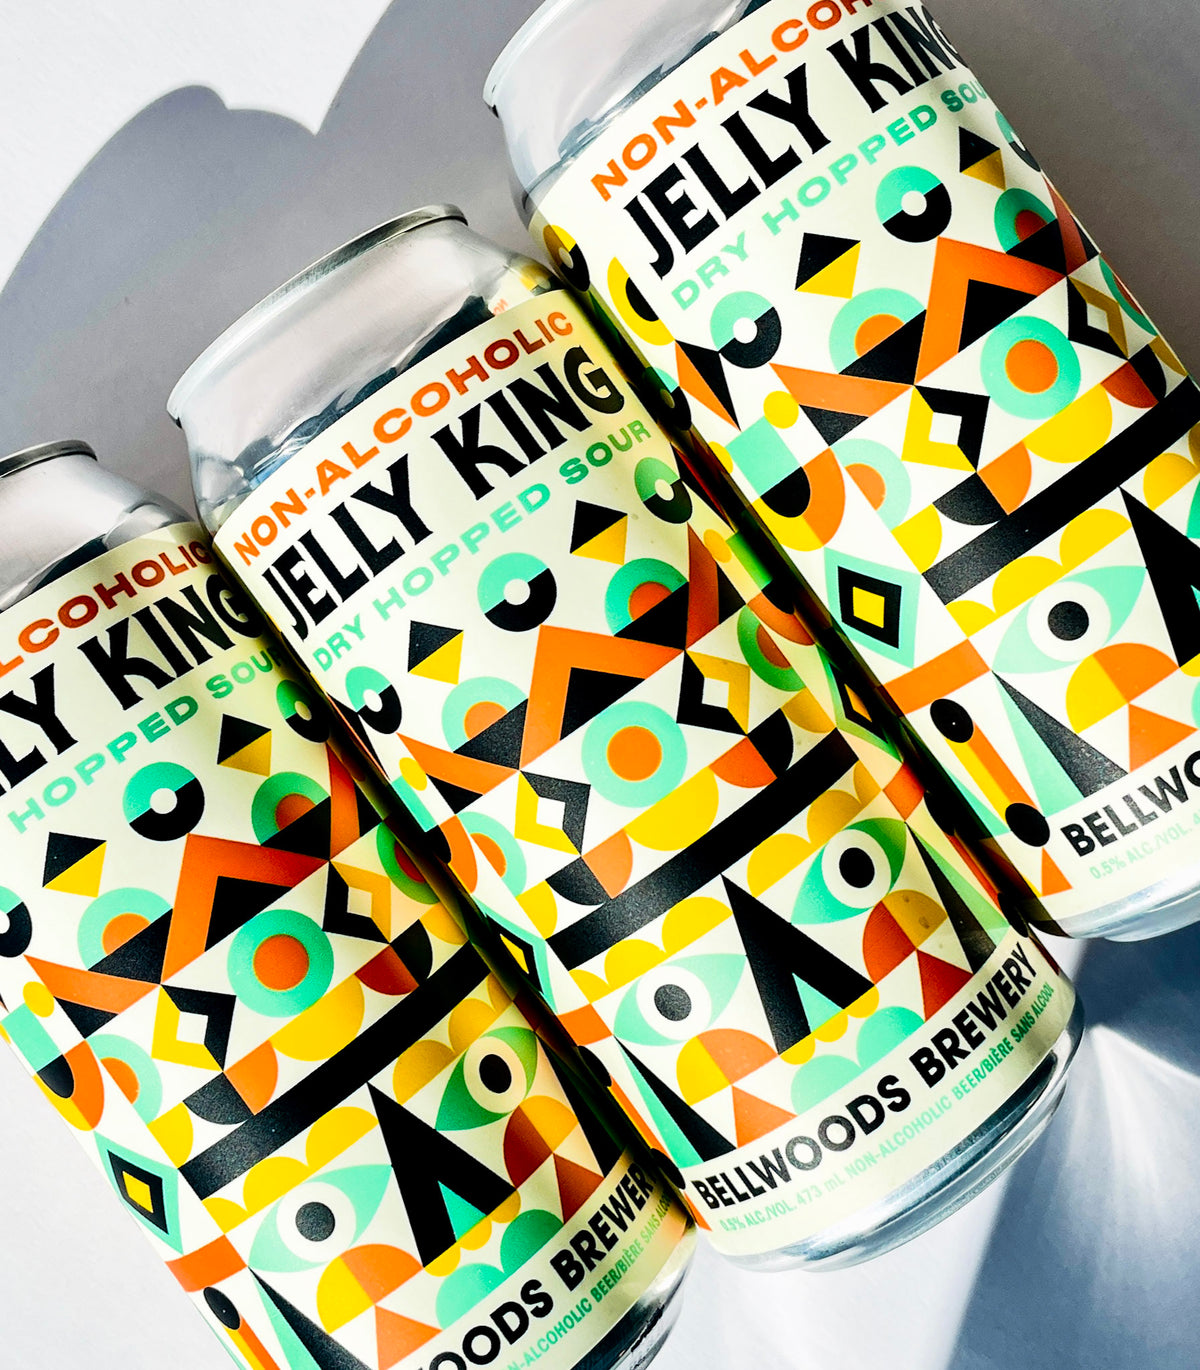 Bellwoods Brewery Jelly King Dry Hopped Non-Alcoholic Sour